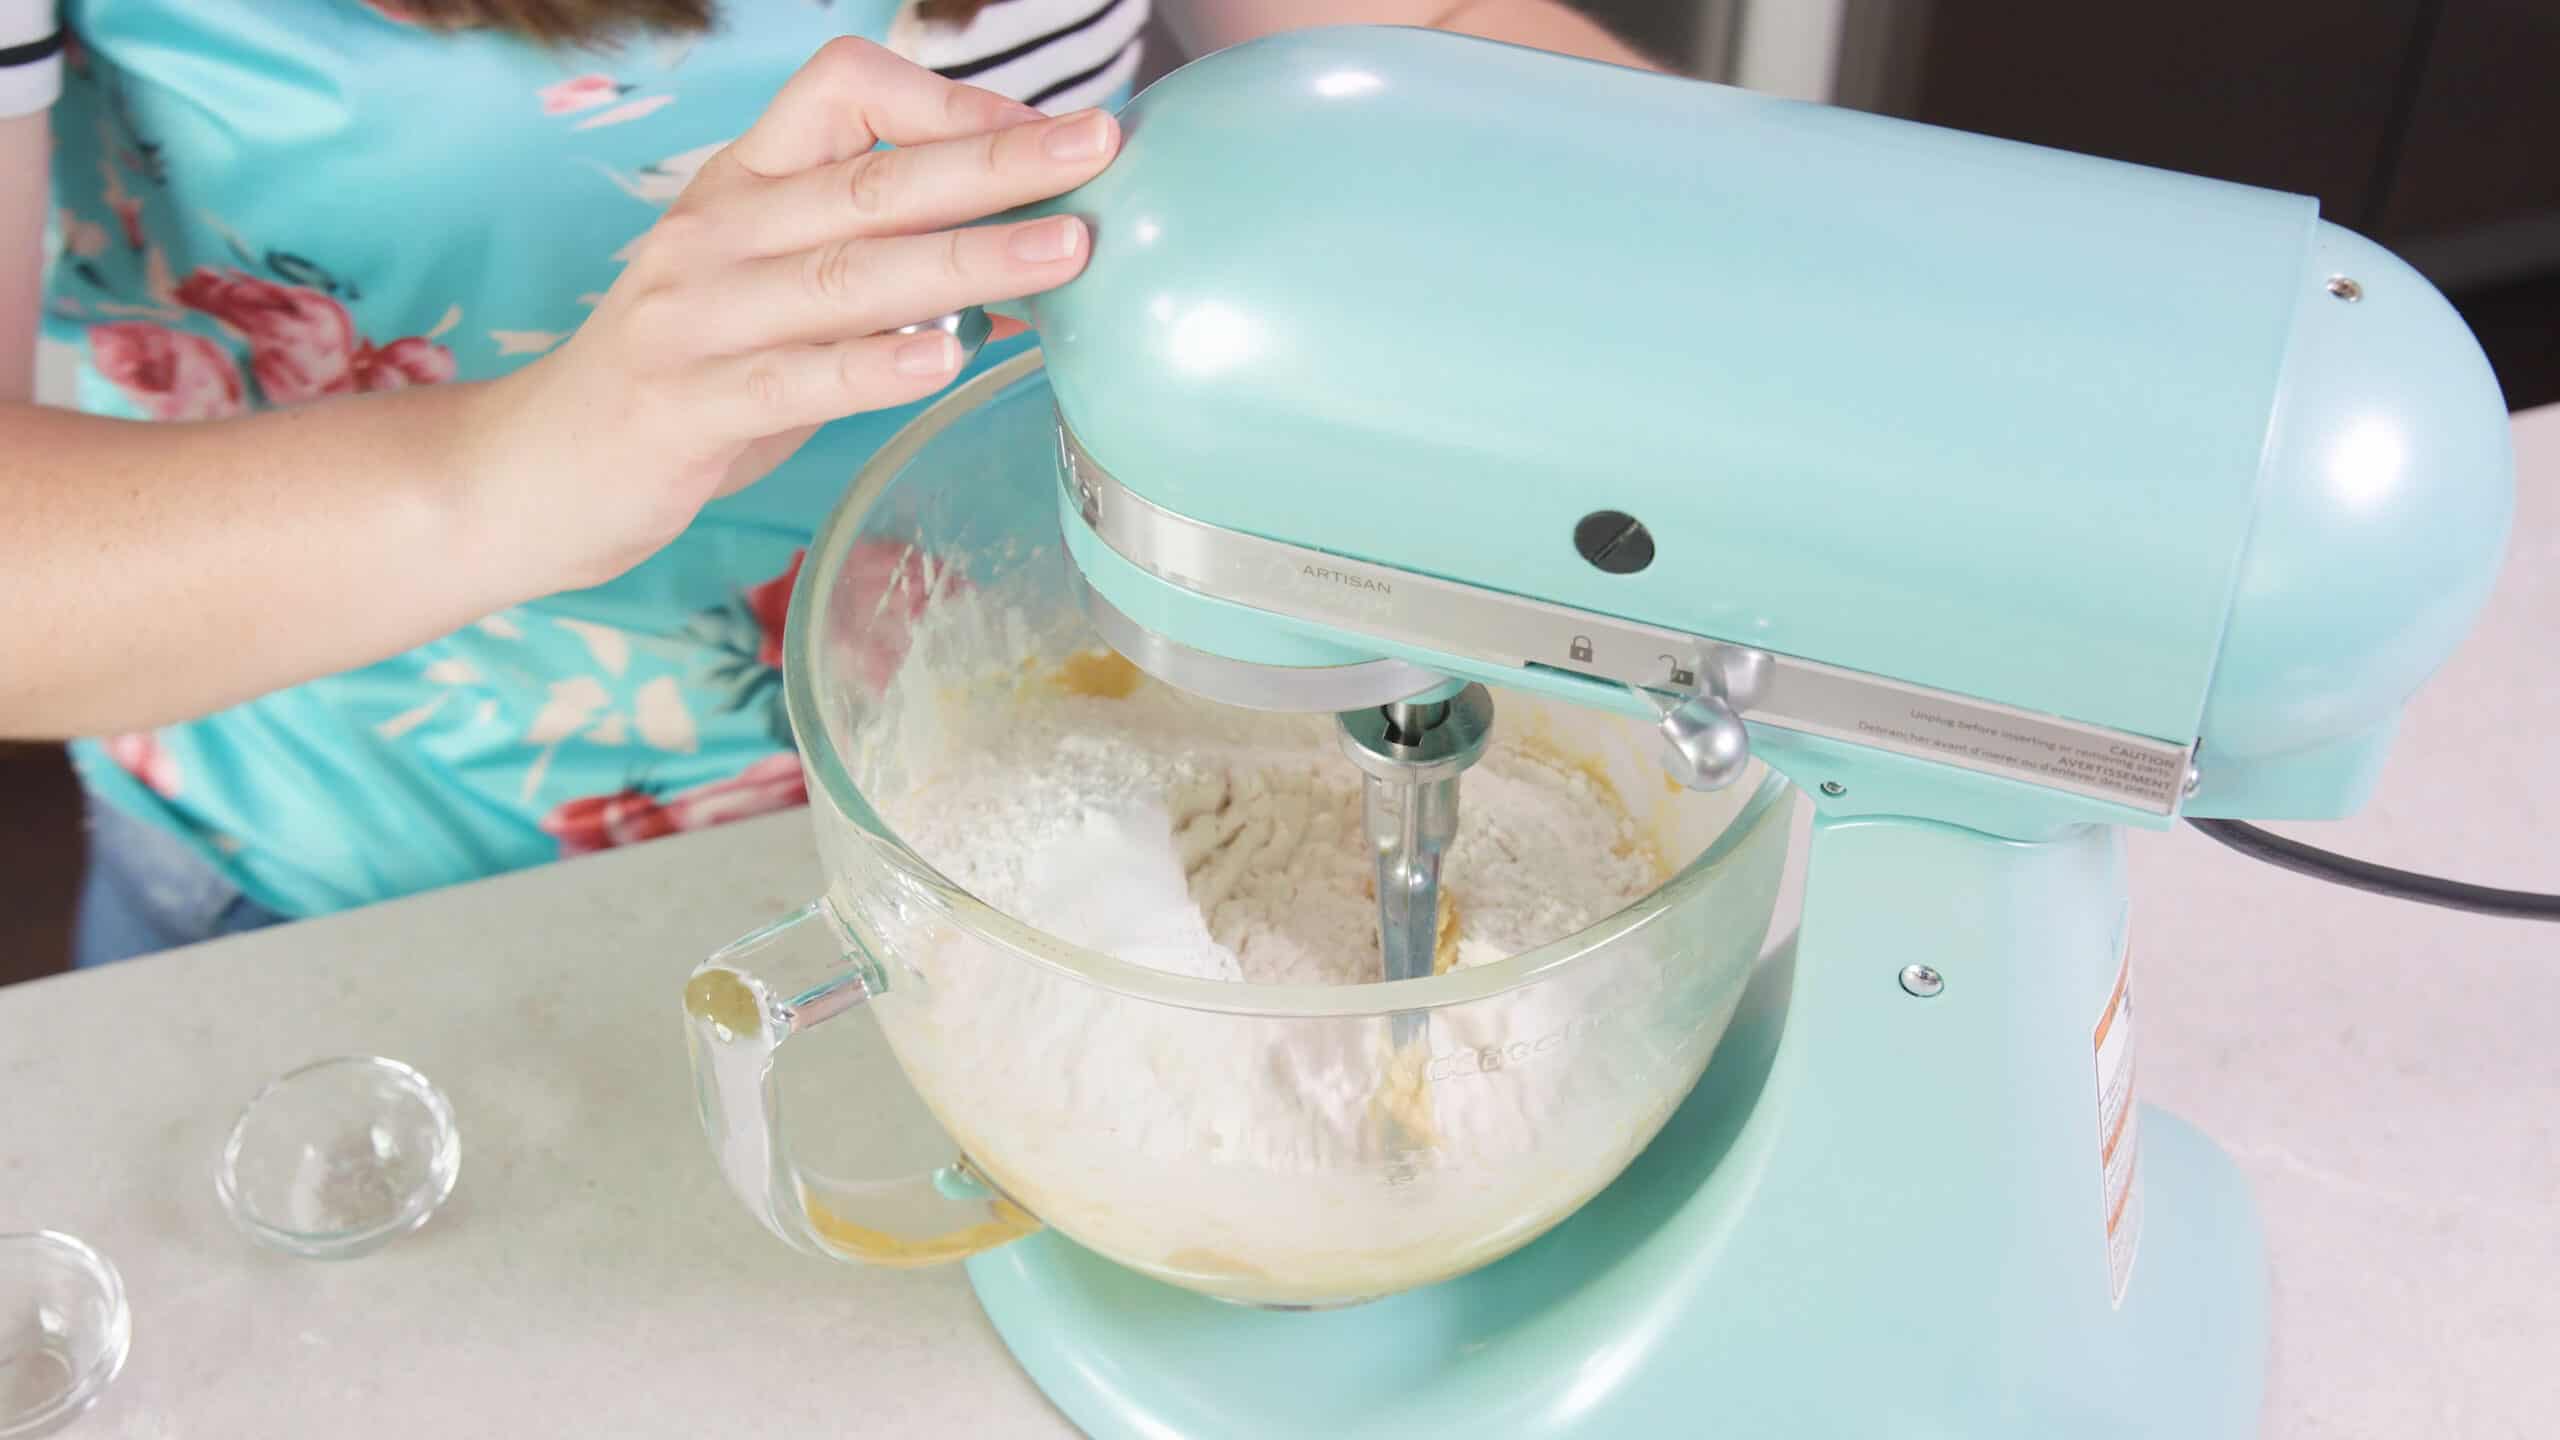 Angled view of countertop kitchen mixer with a clear glass mixing bowl filled with dry and wet ingredients for cookie dough.